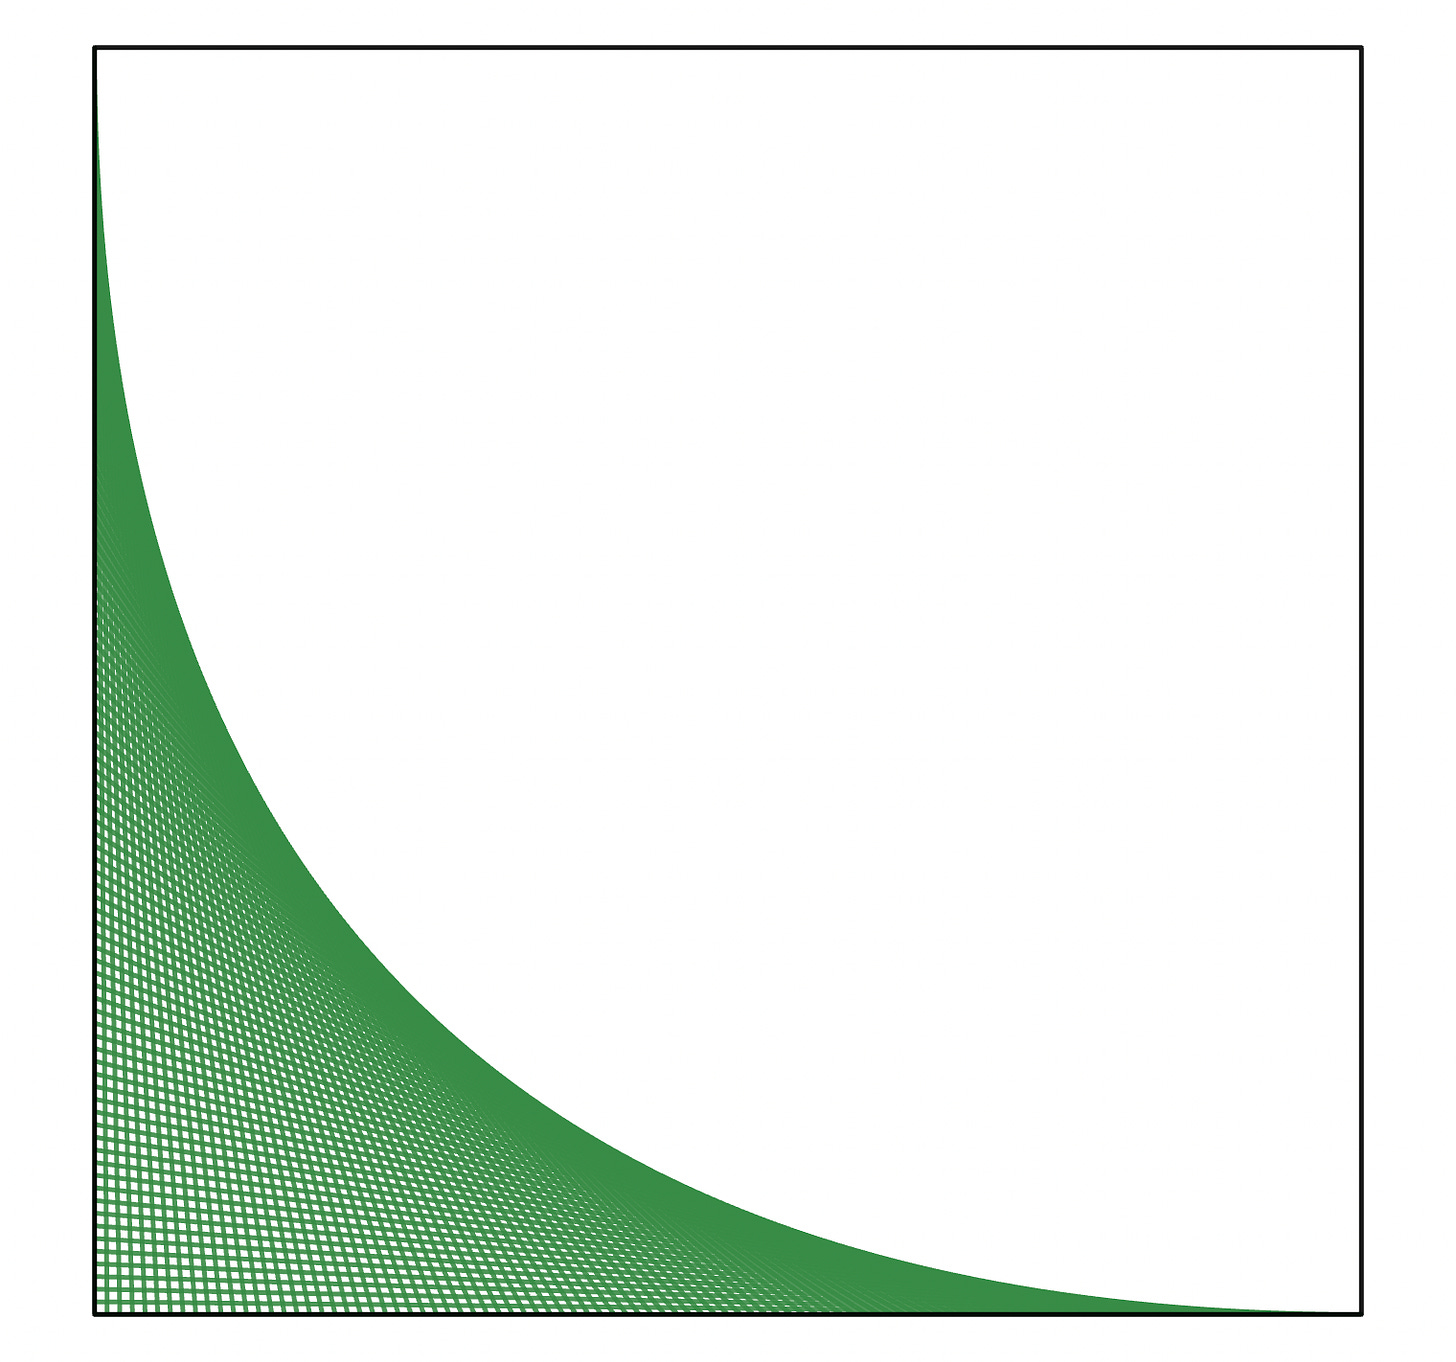 A square is shown. Points along the left edge are connected to points along the bottom edge, forming a mesh of green lines. The top right intersections of the mesh trace out a curve.